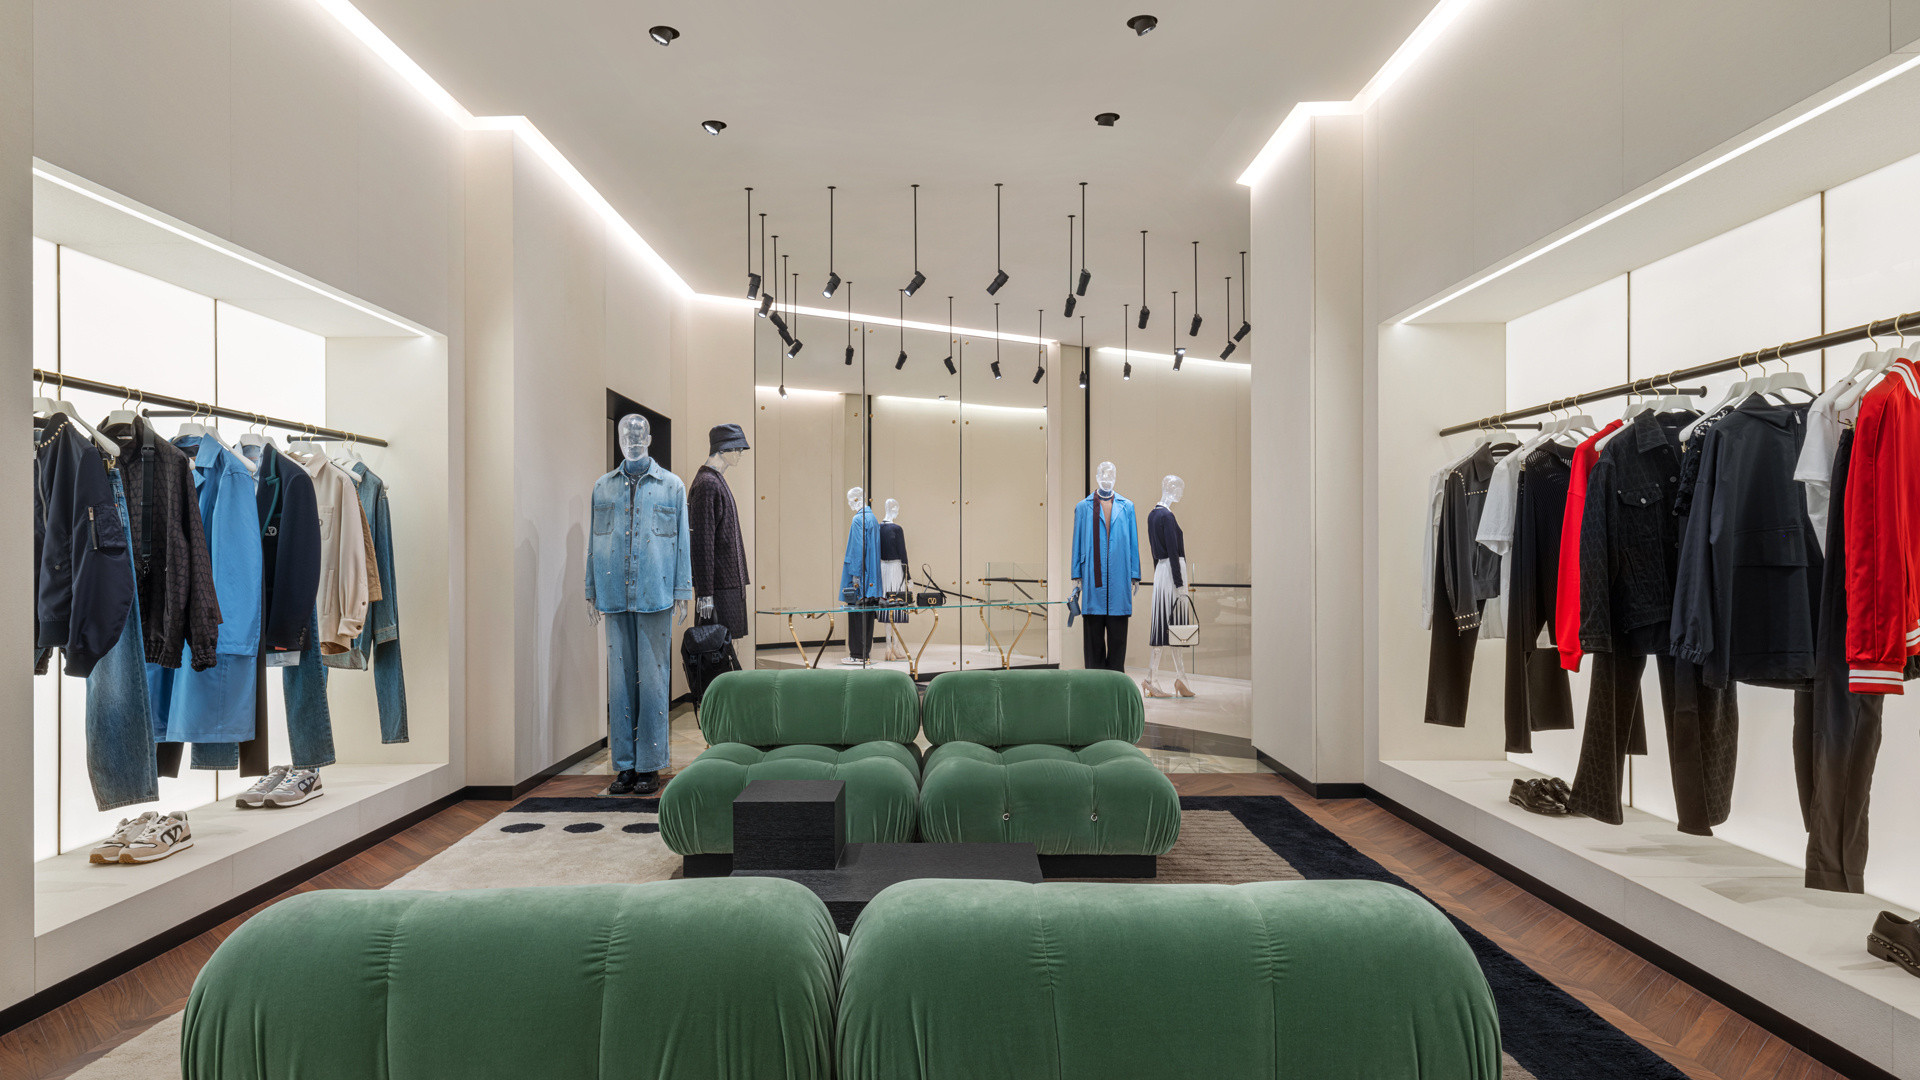 MAISON VALENTINO OPENS ITS NEW BOUTIQUE IN SHANGHAI